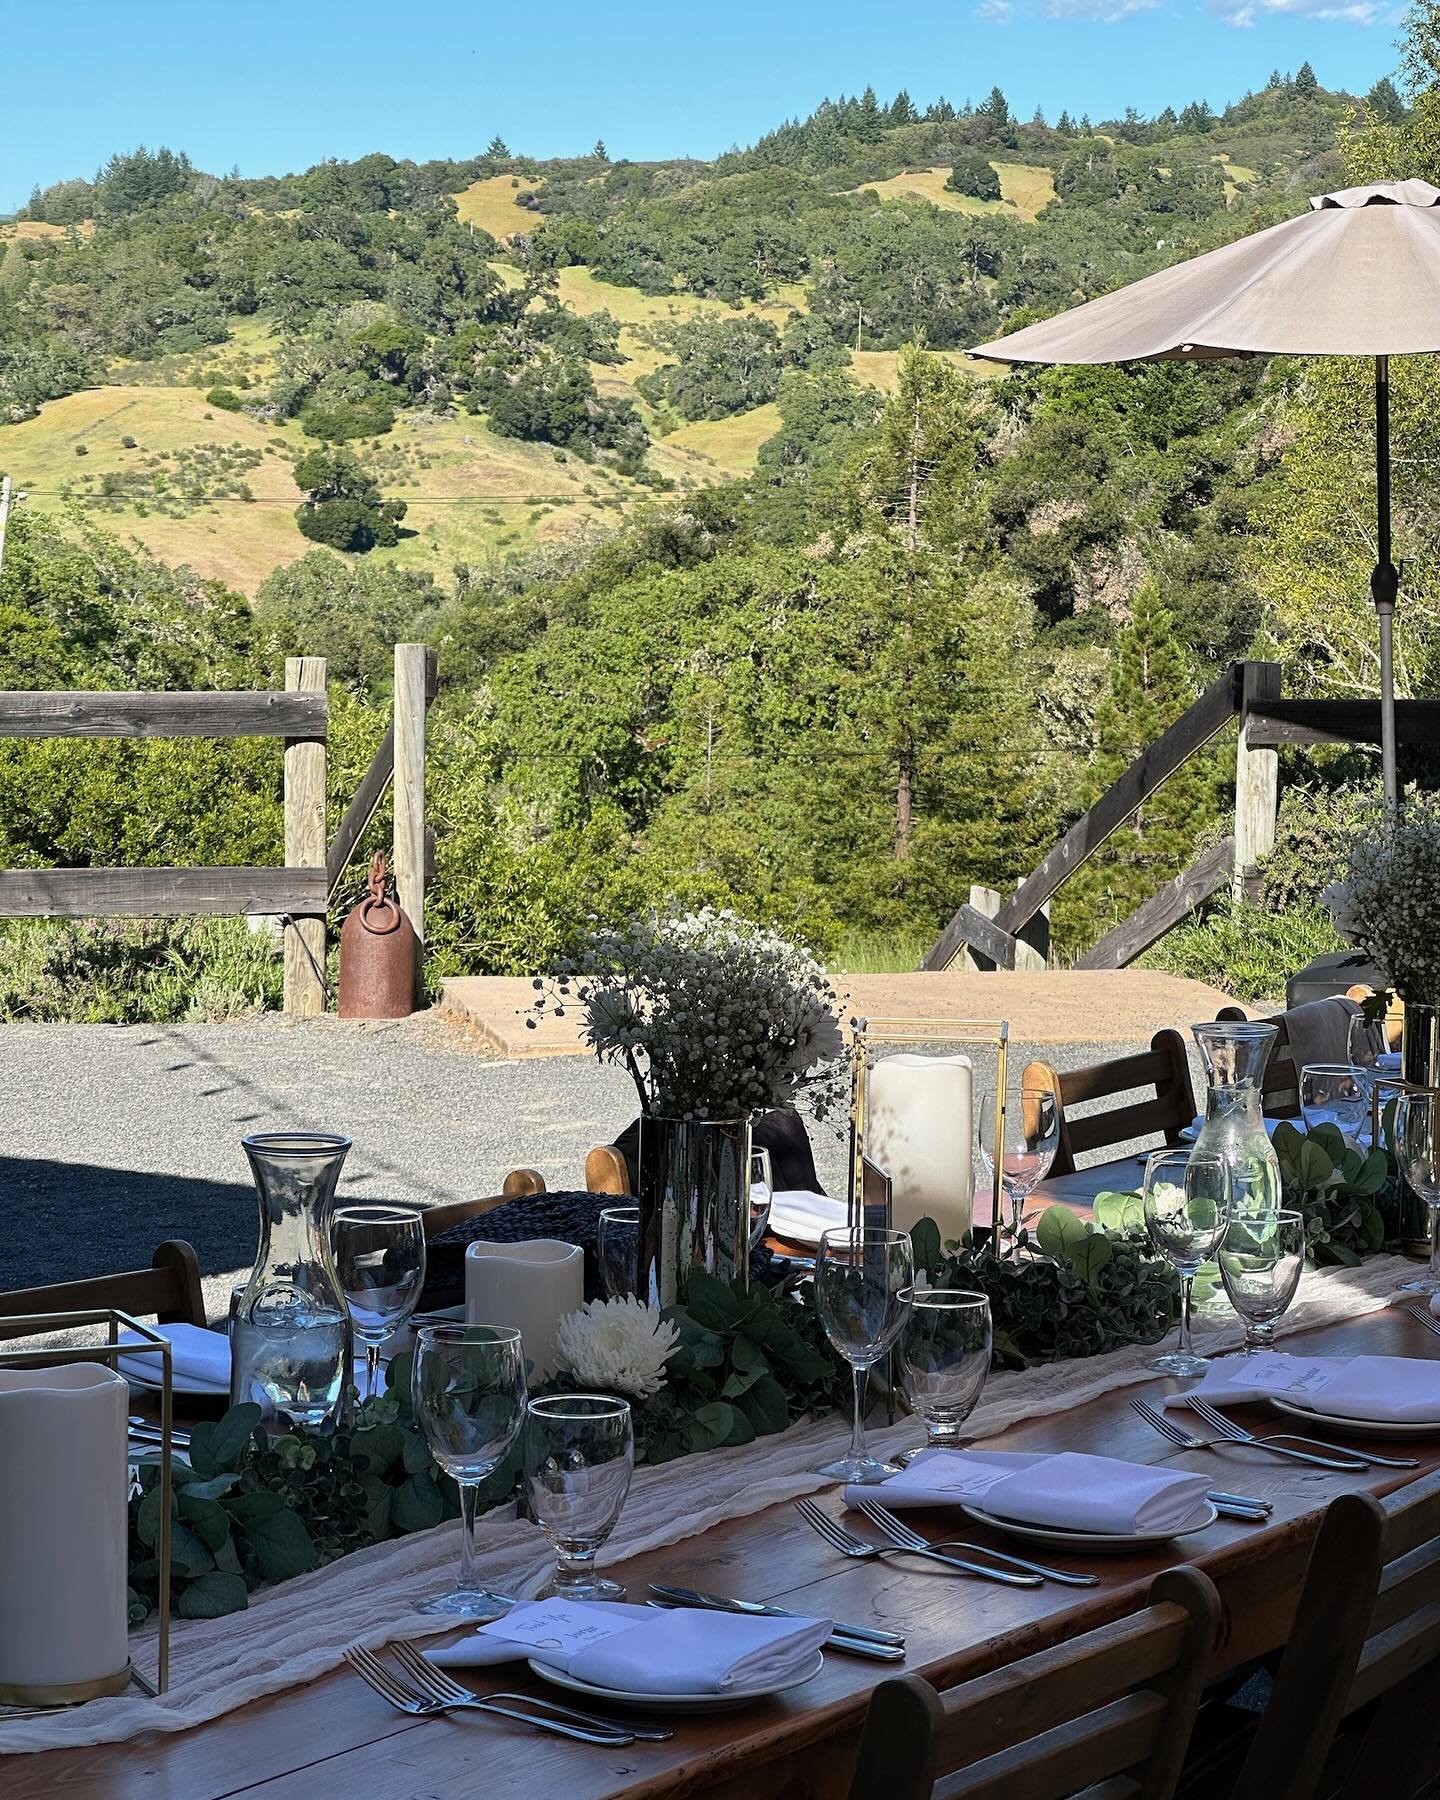 Yesterday&rsquo;s weather was perfect for Alli &amp; Din and @donnaddayevents and Karen brought it to life perfectly. Such a great team of vendors. 

#thehighlandsestate
#destinationwedding #sonomawedding #napawedding #winecountrywedding #bayareawedd